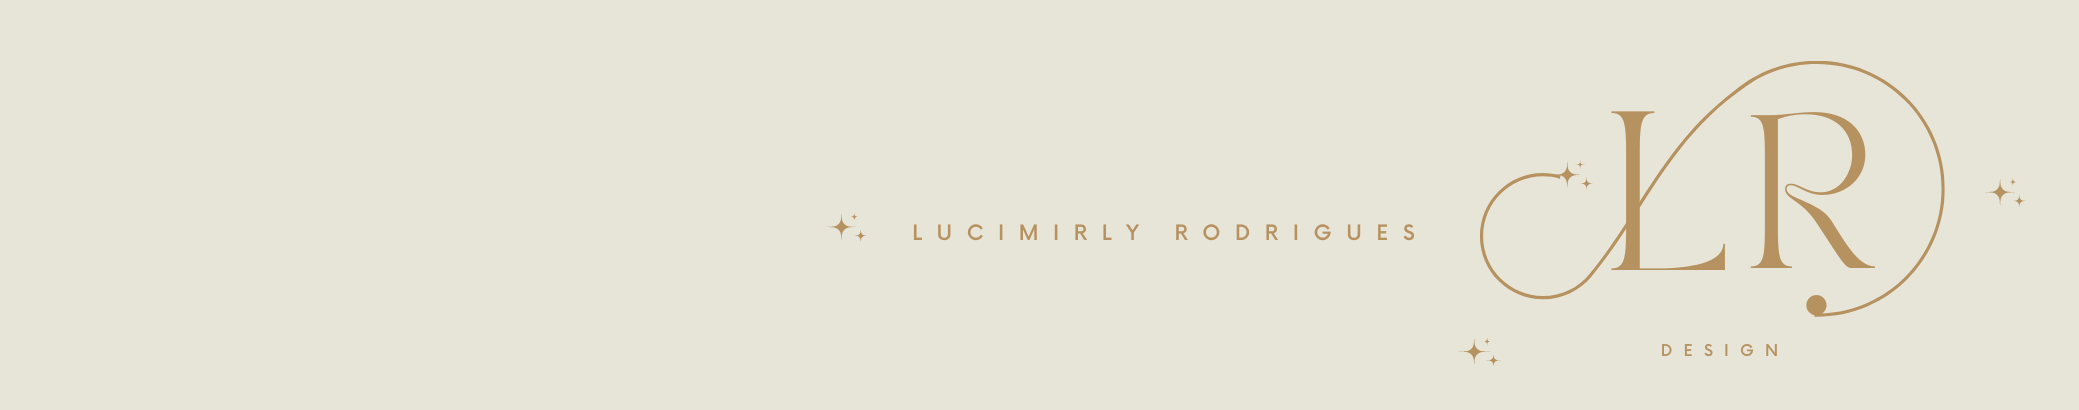 Lucimirly Rodrigues's profile banner